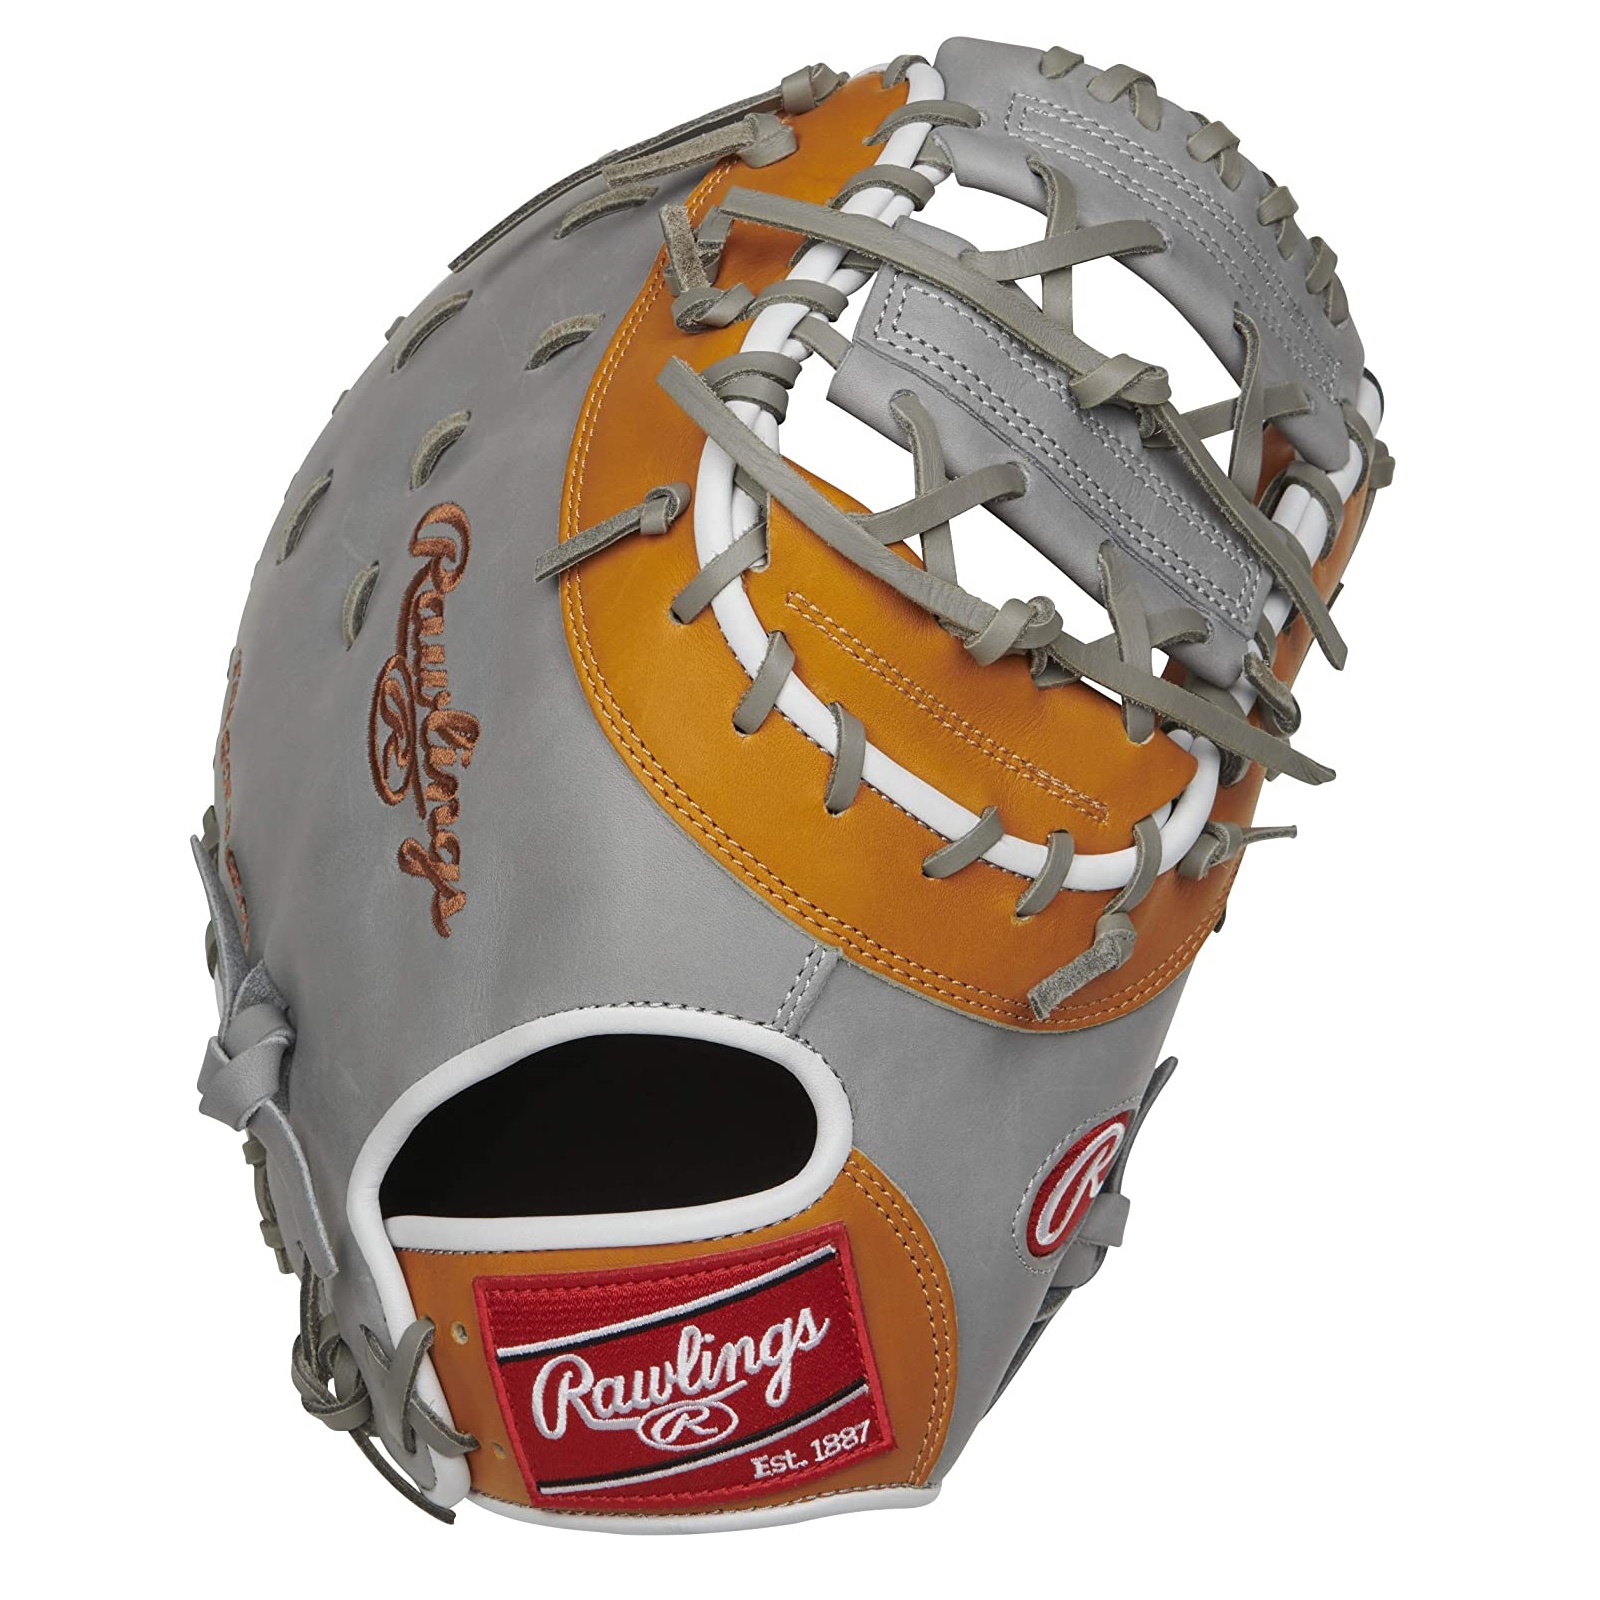 rawlings-heart-of-the-hide-anthony-rizzo-gameday-model-first-base-baseball-glove-grey-tan-12-75-inch-right-hand-throw PROAR44-RightHandThrow Rawlings  <p>As a world champion Anthony Rizzo could use any glove but